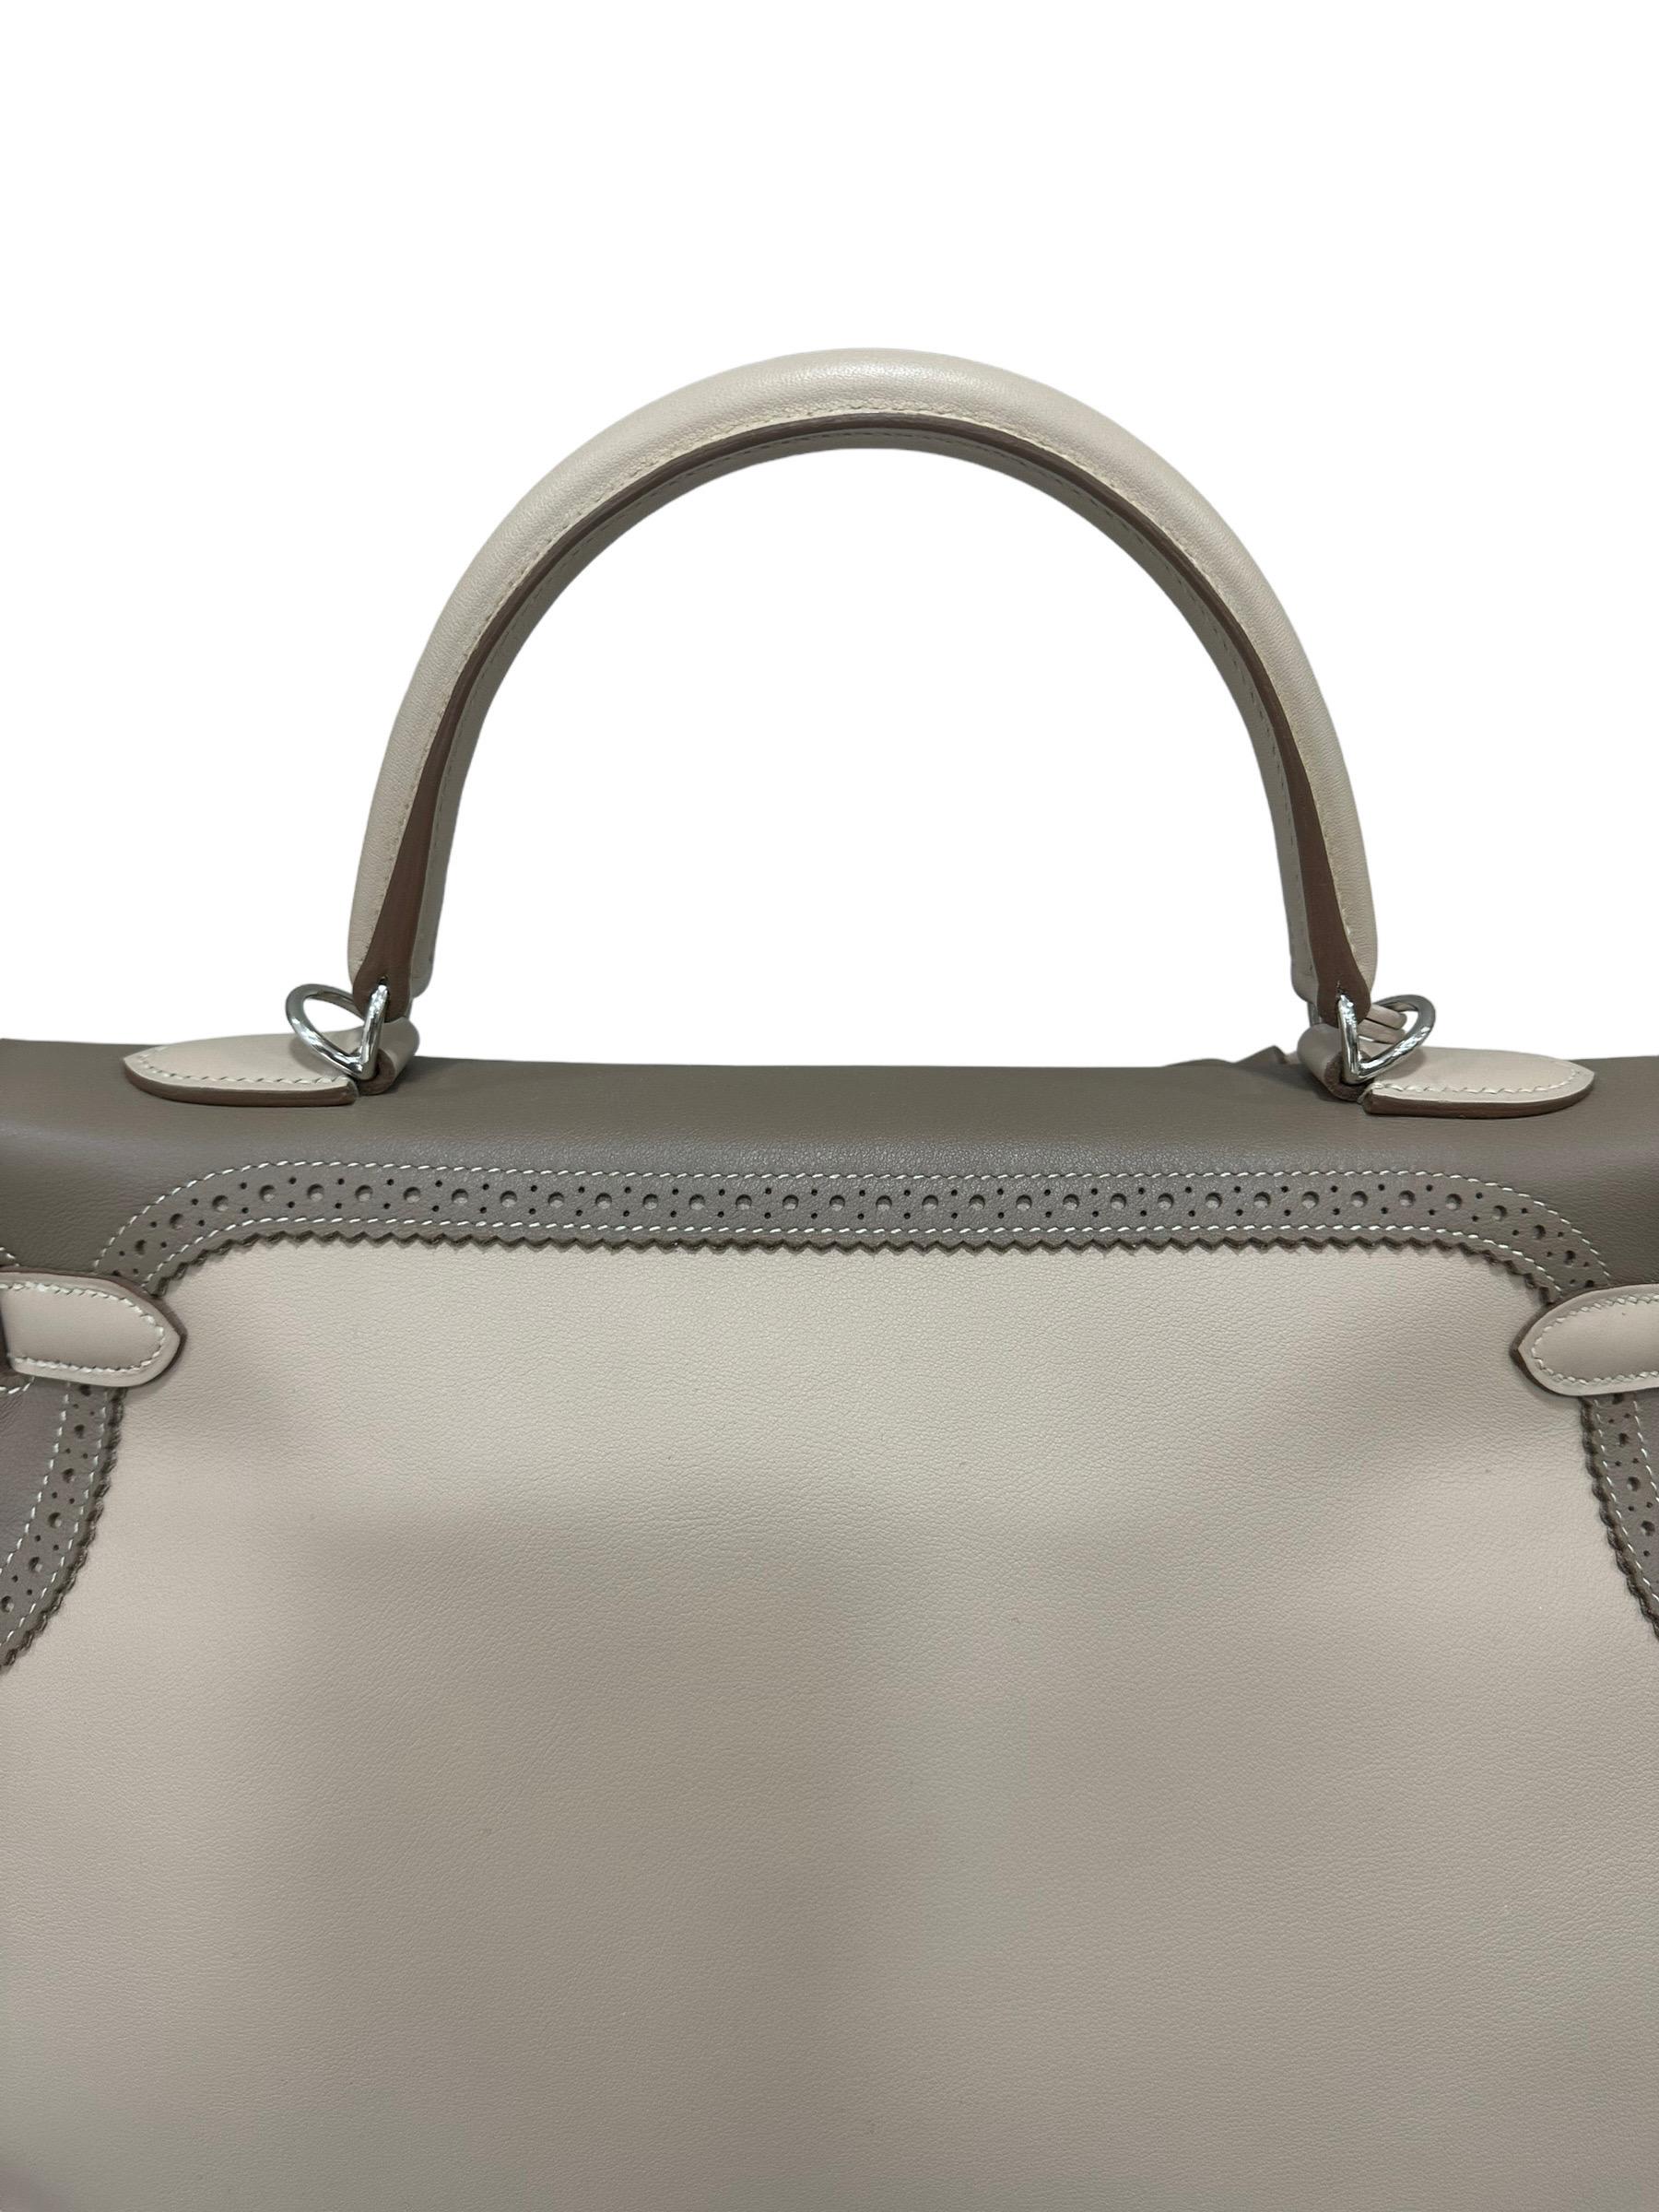 2012 Hermès Kelly 35 Ghillies Evercalf Craie/Taupe For Sale 1